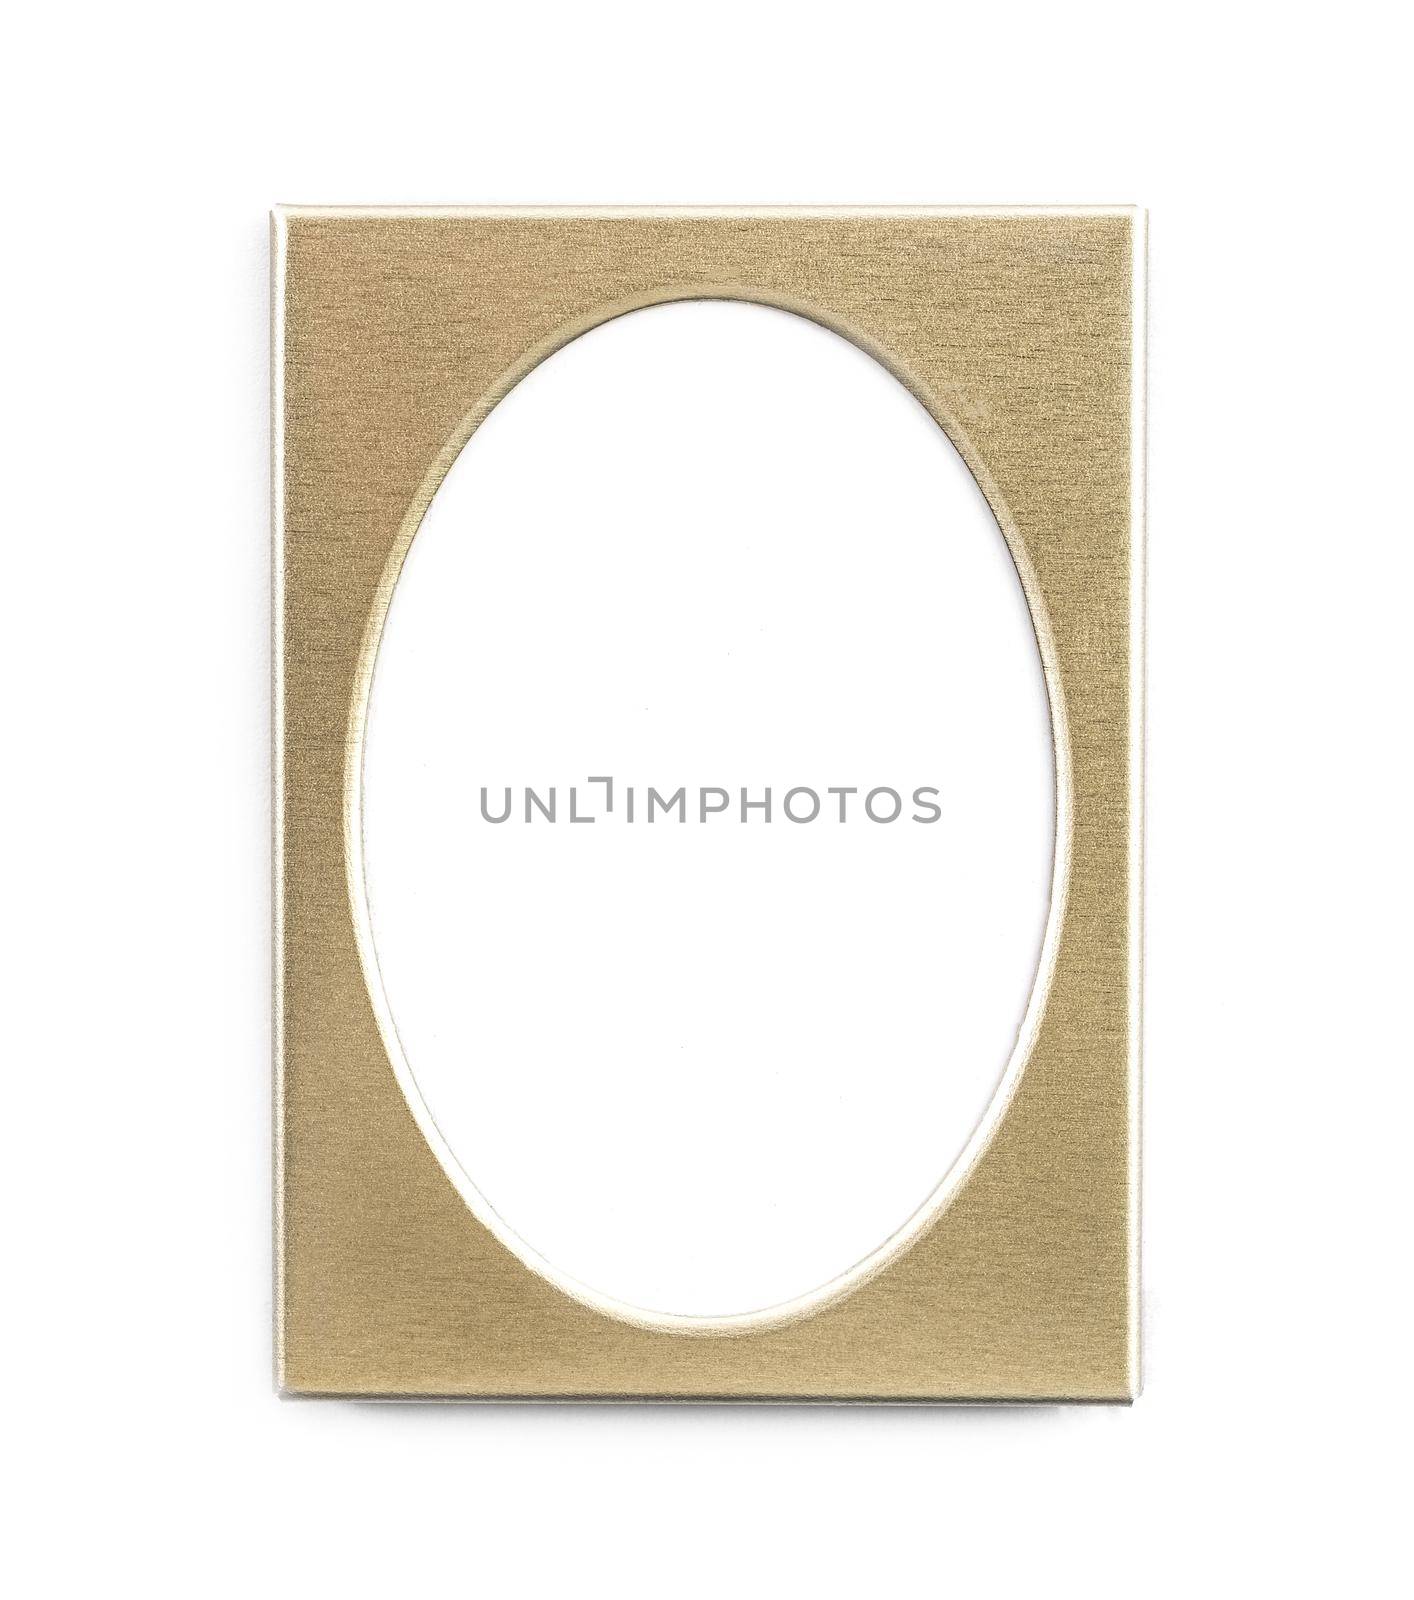 Empty oval golden photo frame isolated on white background